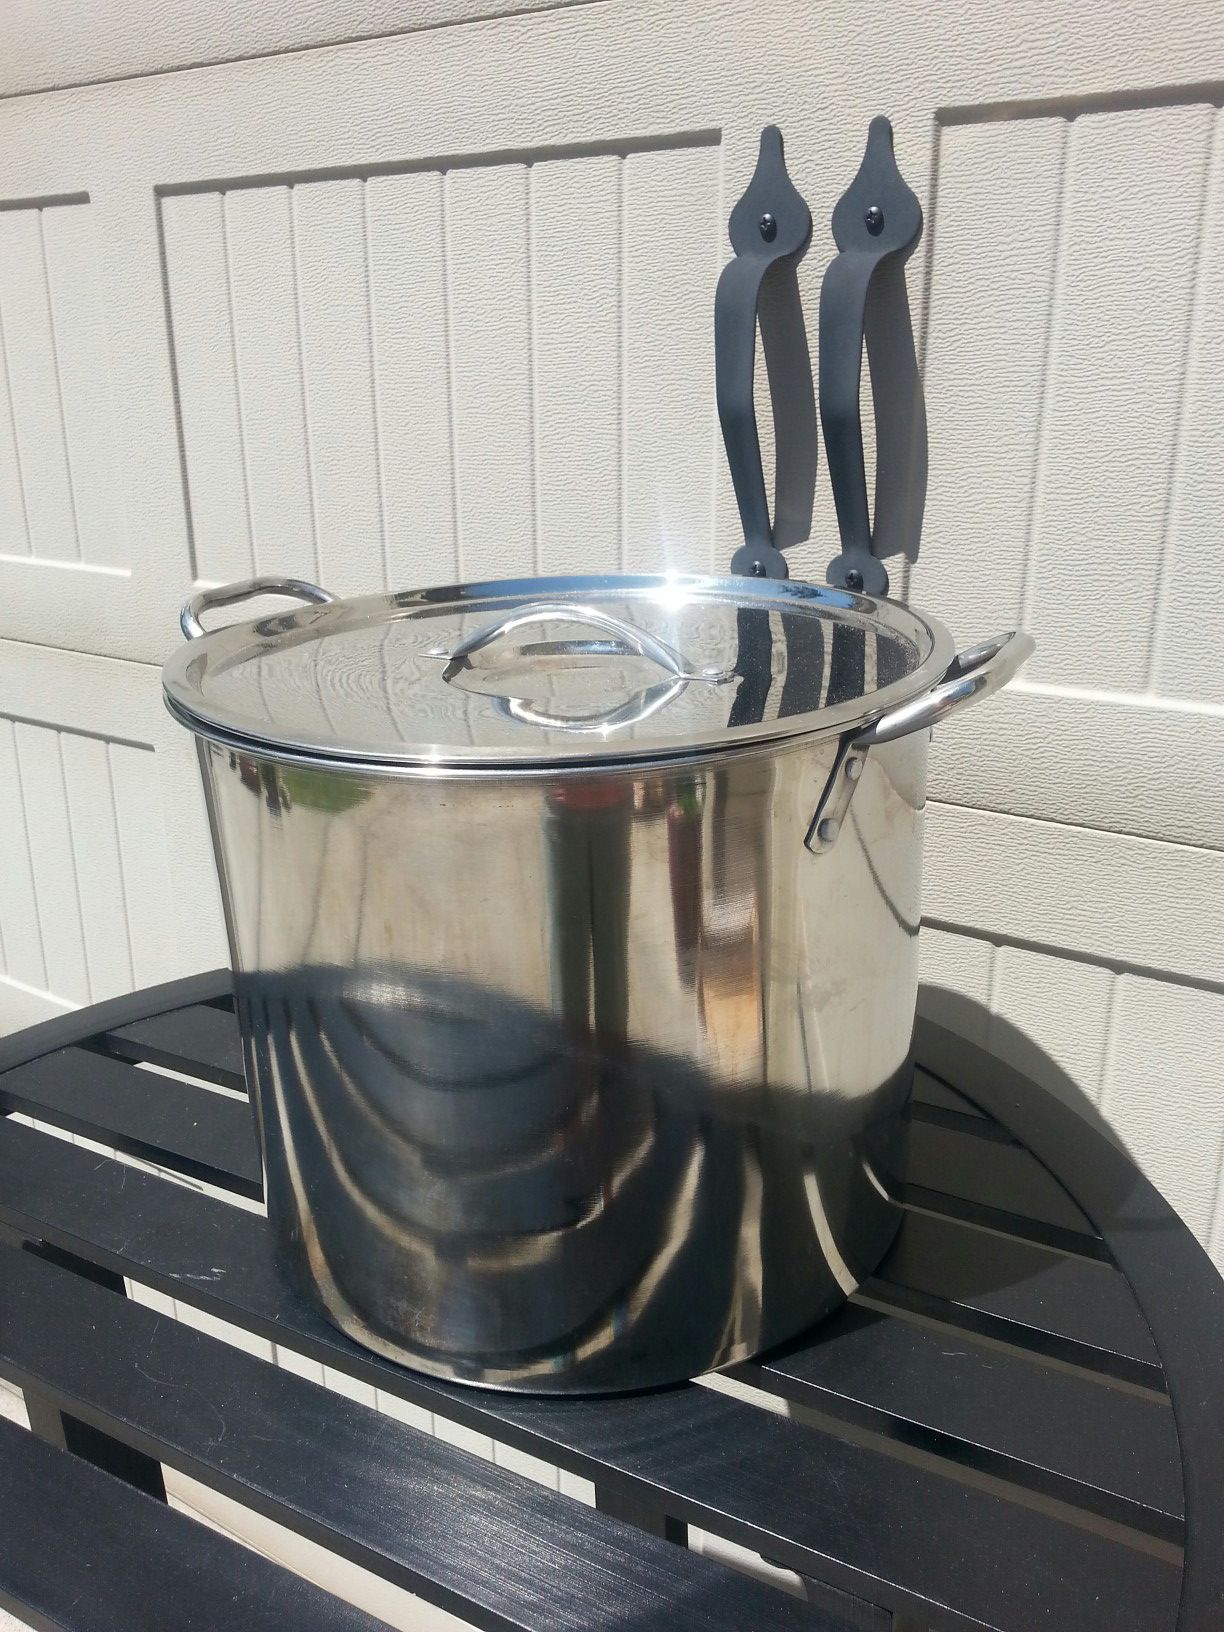 16 quart stock pot polished stainless steel pot Stainless Steel stock pot with lid 16 quart